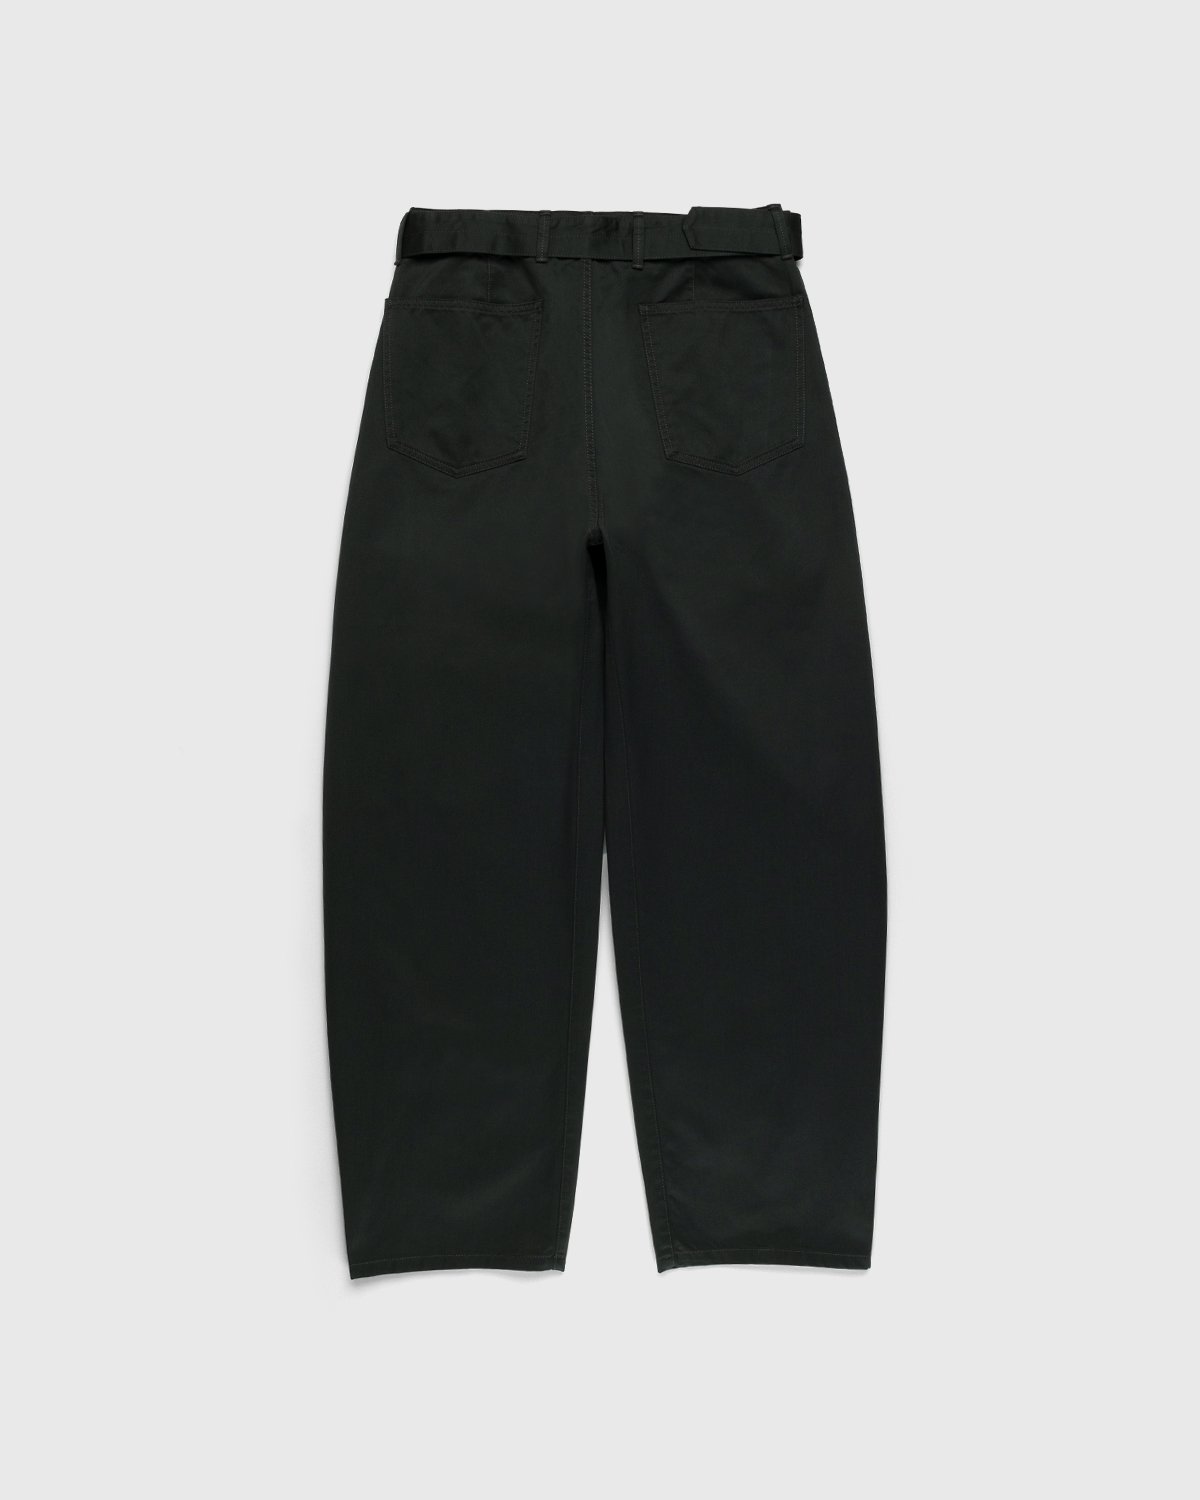 Lemaire - Twisted Belted Pants Dark Slate Green - Clothing - Grey - Image 2